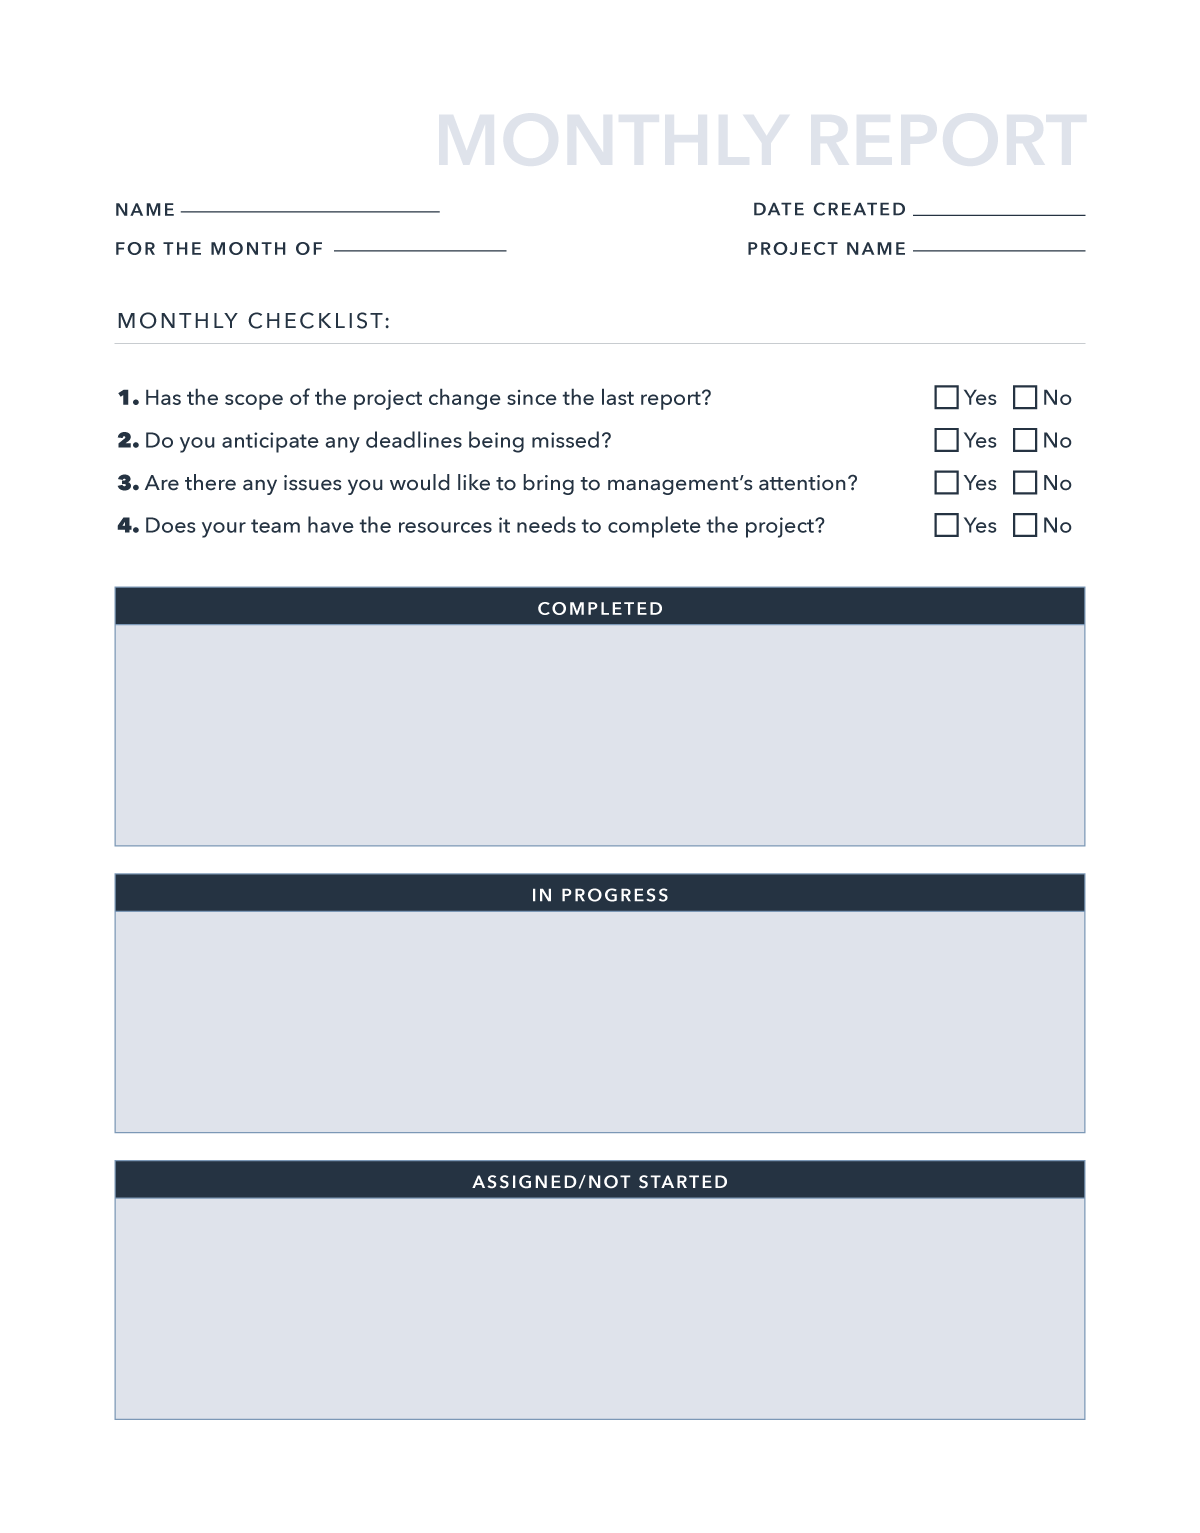 Monthly Report Template Excel